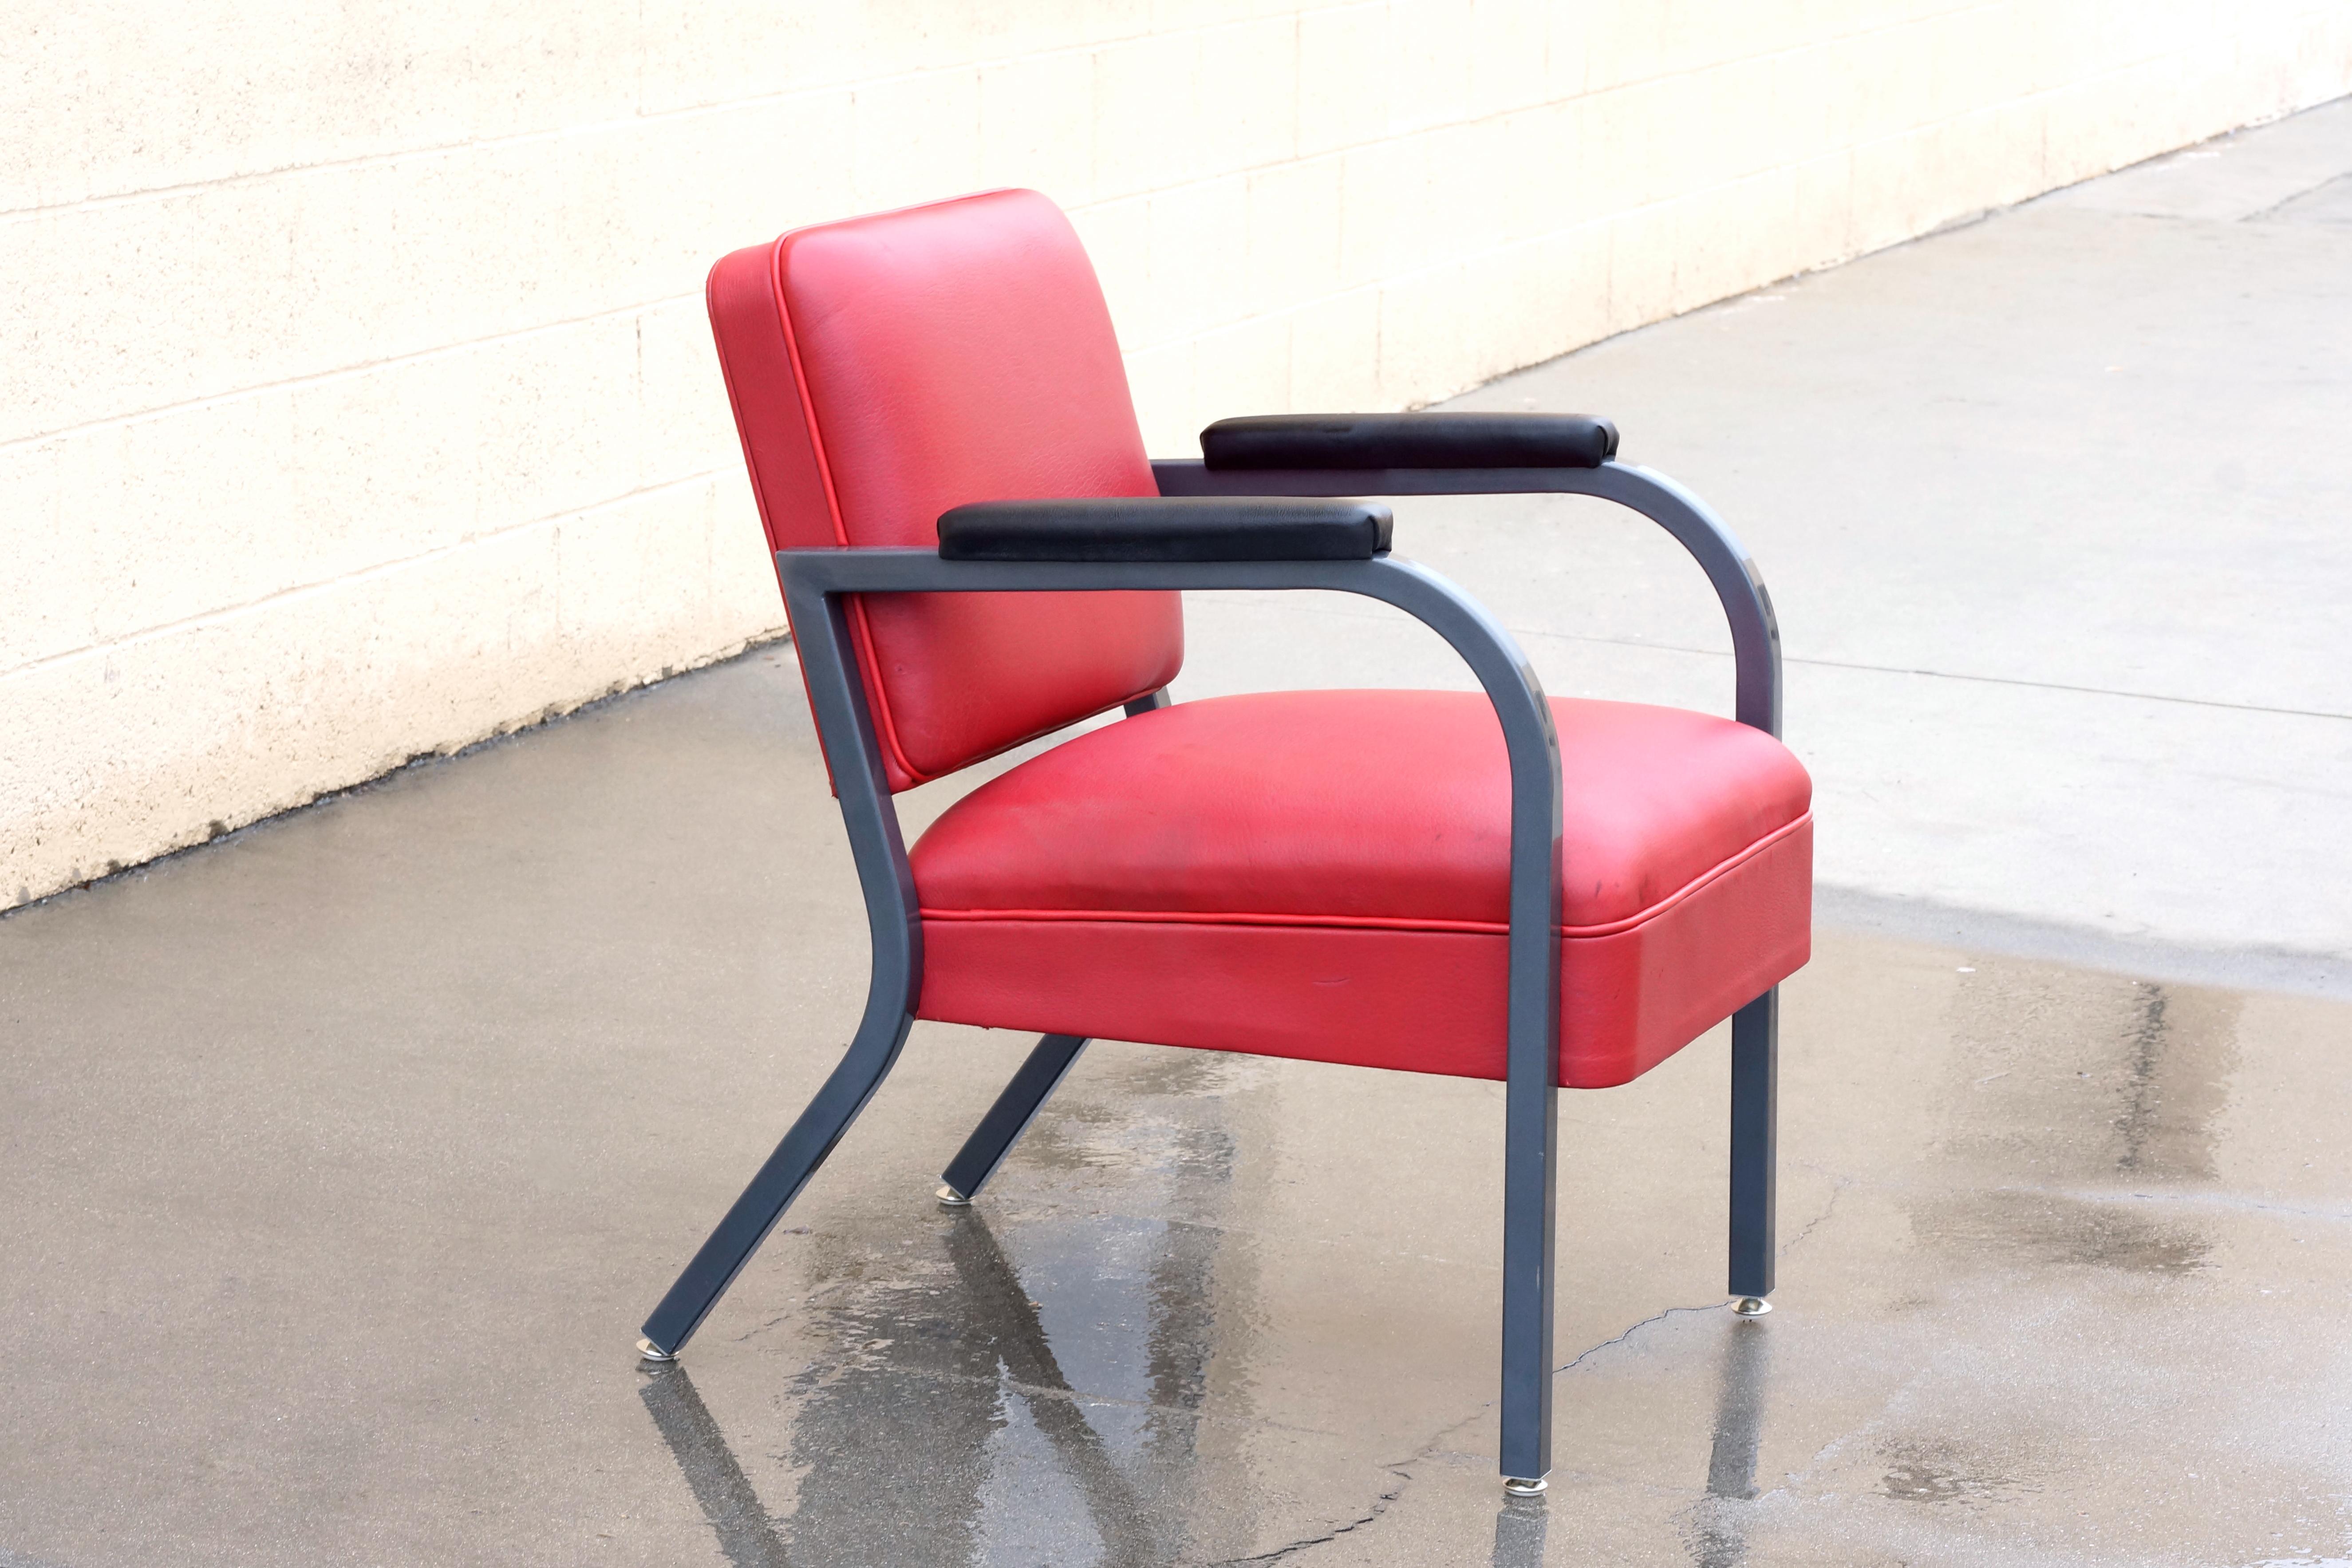 Wonderfully articulated armchair from the early 1950s. Uncommon frame design with atomic styling. Newly refinished steel in Metallic Gray (GR02), red deerskin seat and black leather armcaps. 

Dimensions: 21